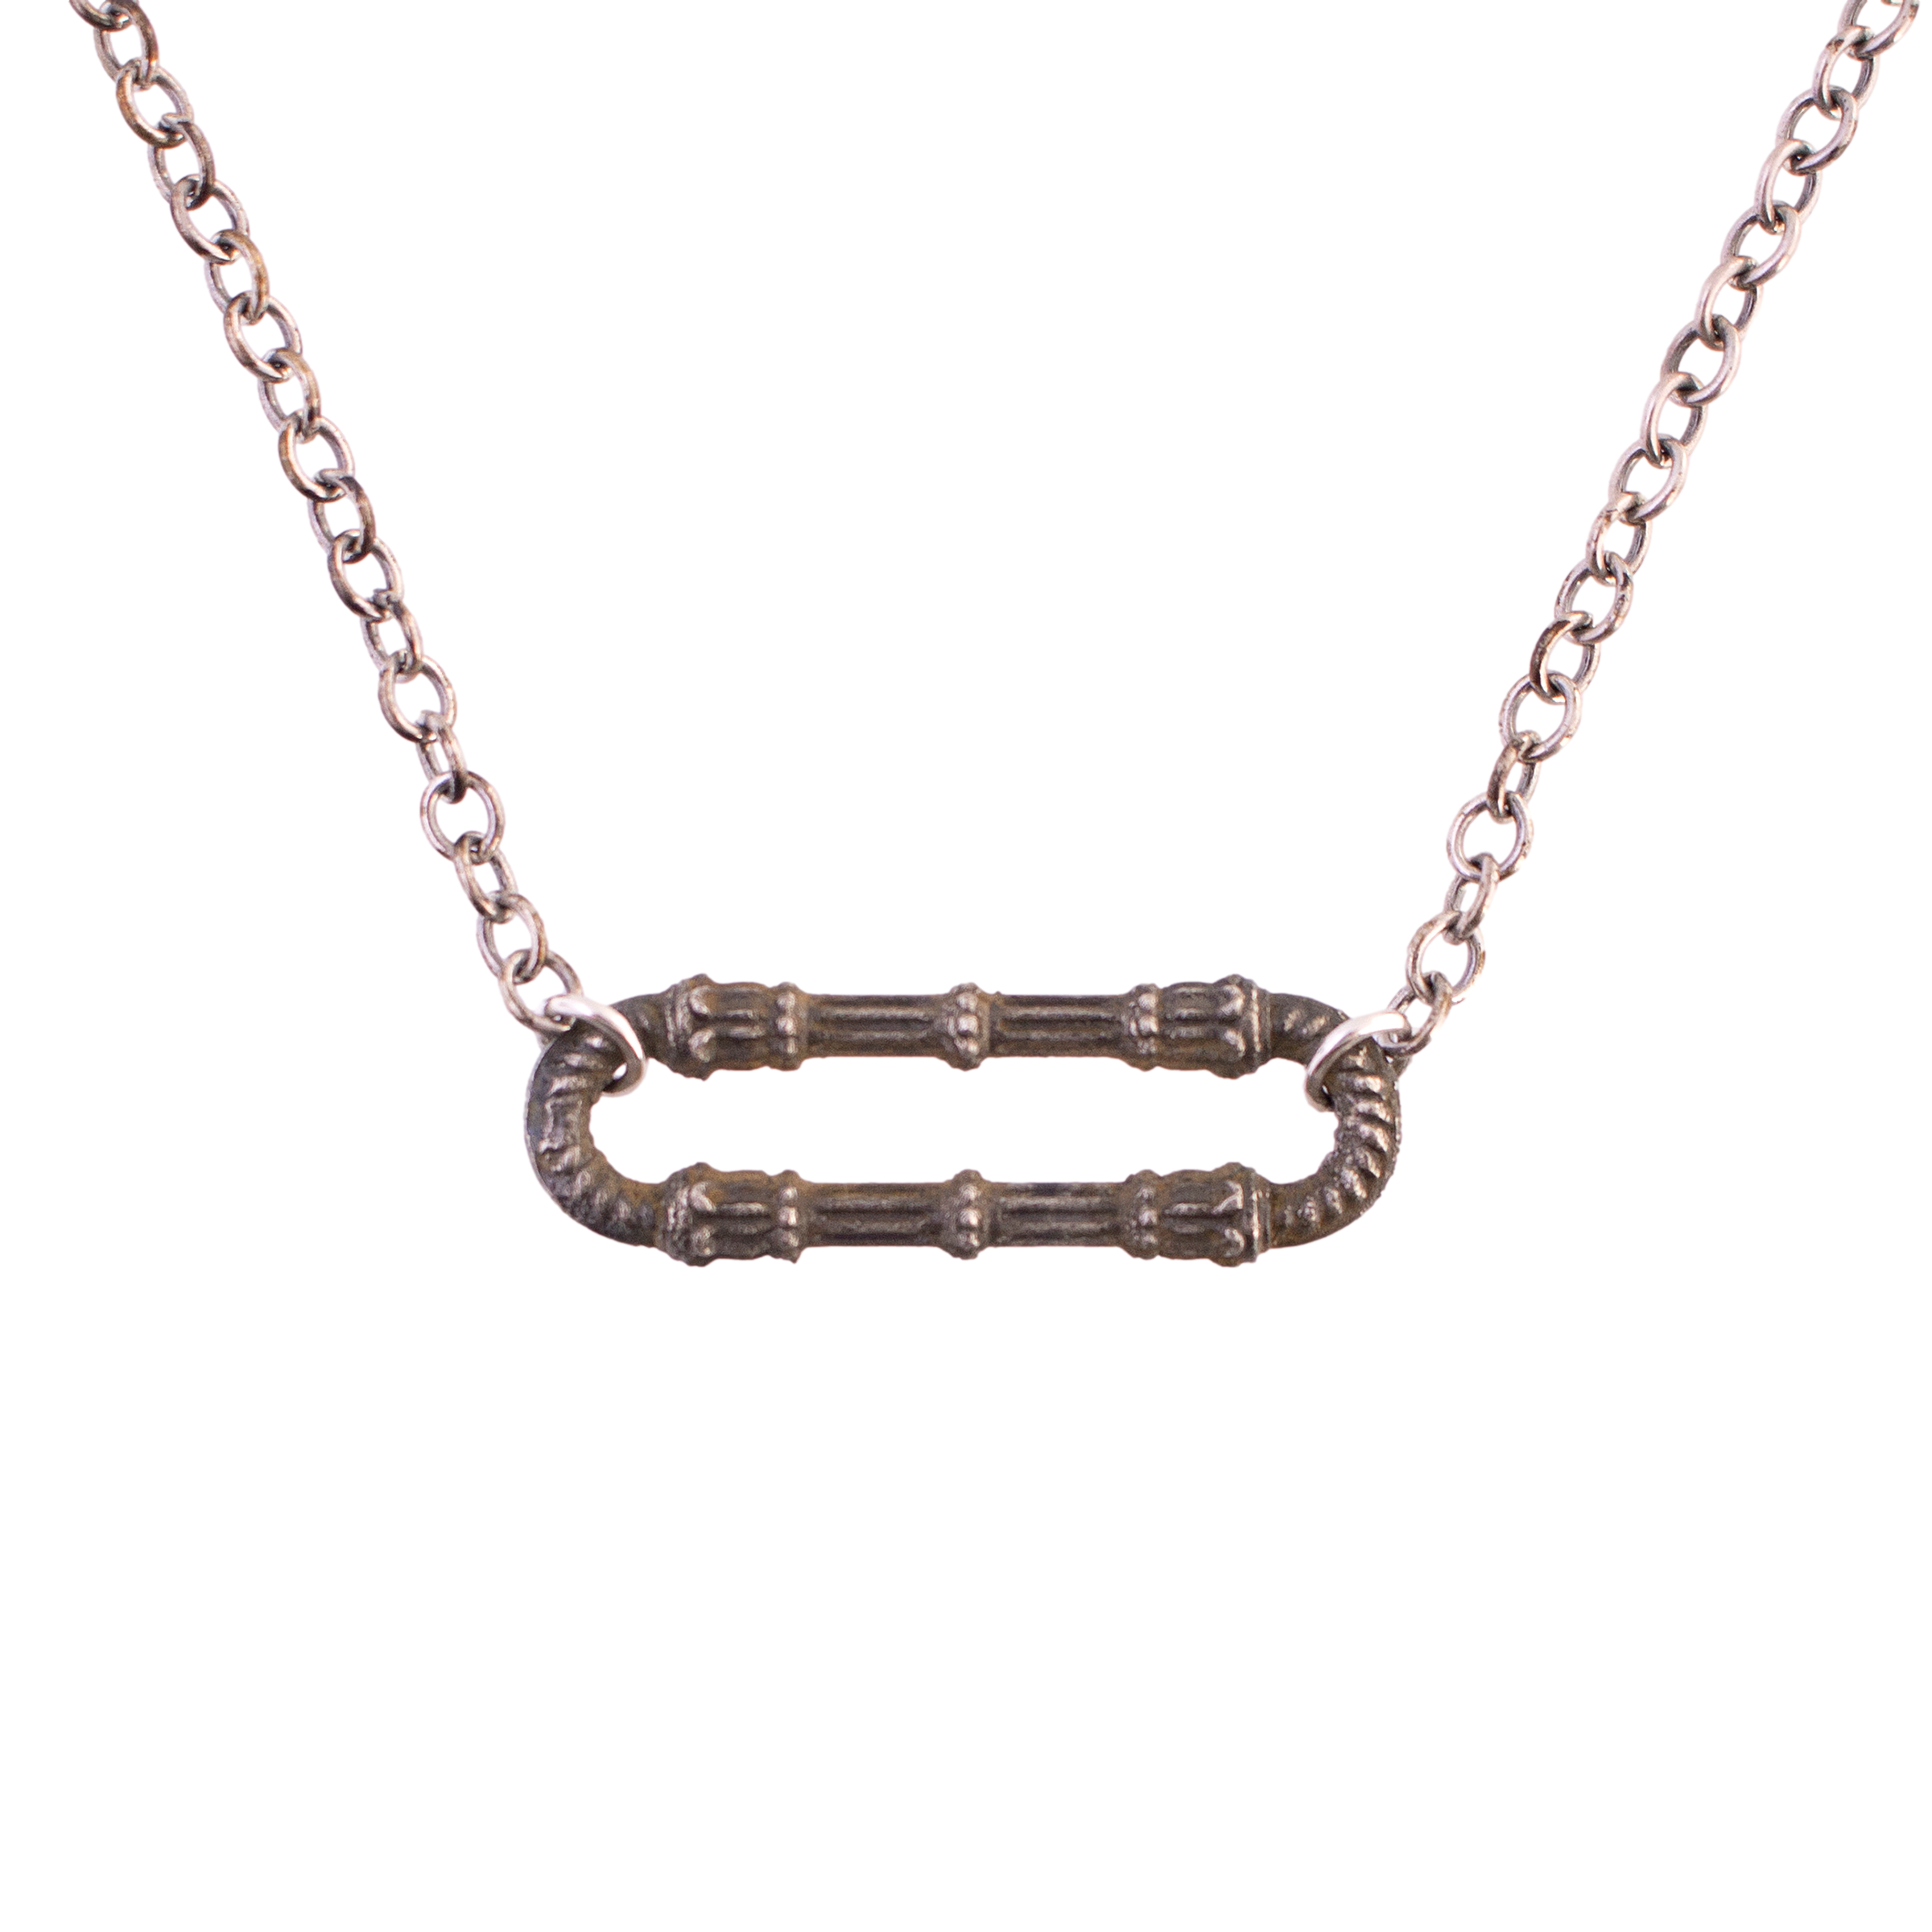 Wrought Iron Link Necklace